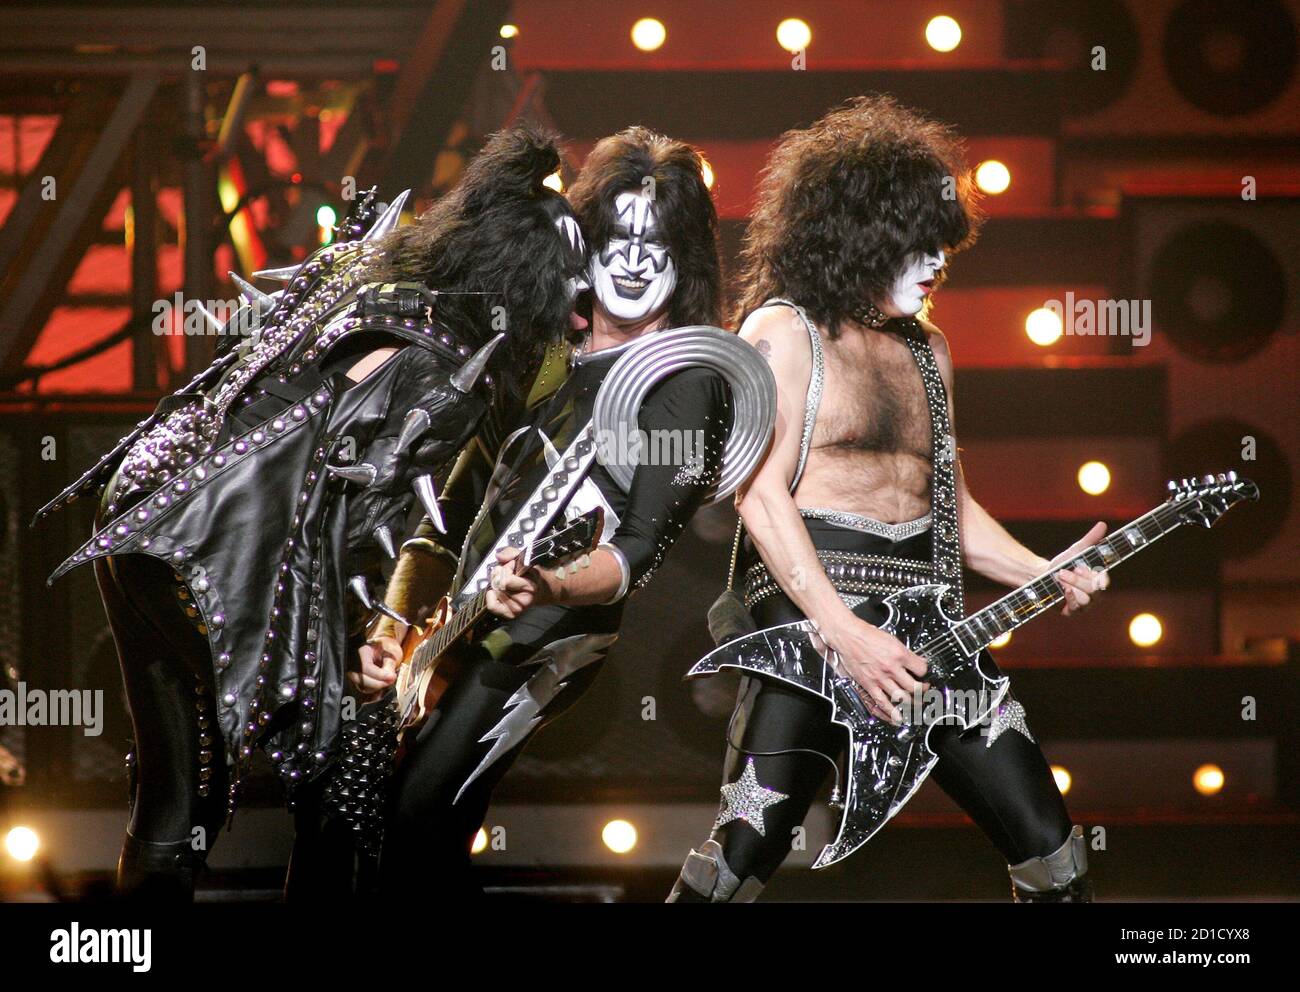 Bass guitarist Gene Simmons (L), and guitarists Tommy Thayer (C) and Paul Stanley of KISS perform during the VH1 Rock Honors concert at the Mandalay Bay Events Center in Las Vegas, Nevada May 25, 2006. The show, honoring the legends of hard rock, will be broadcast May 31 on the VH1 network. [The tribute show celebrates the music and influence of Queen, Def Leppard, Judas Priest and KISS.] Stock Photo